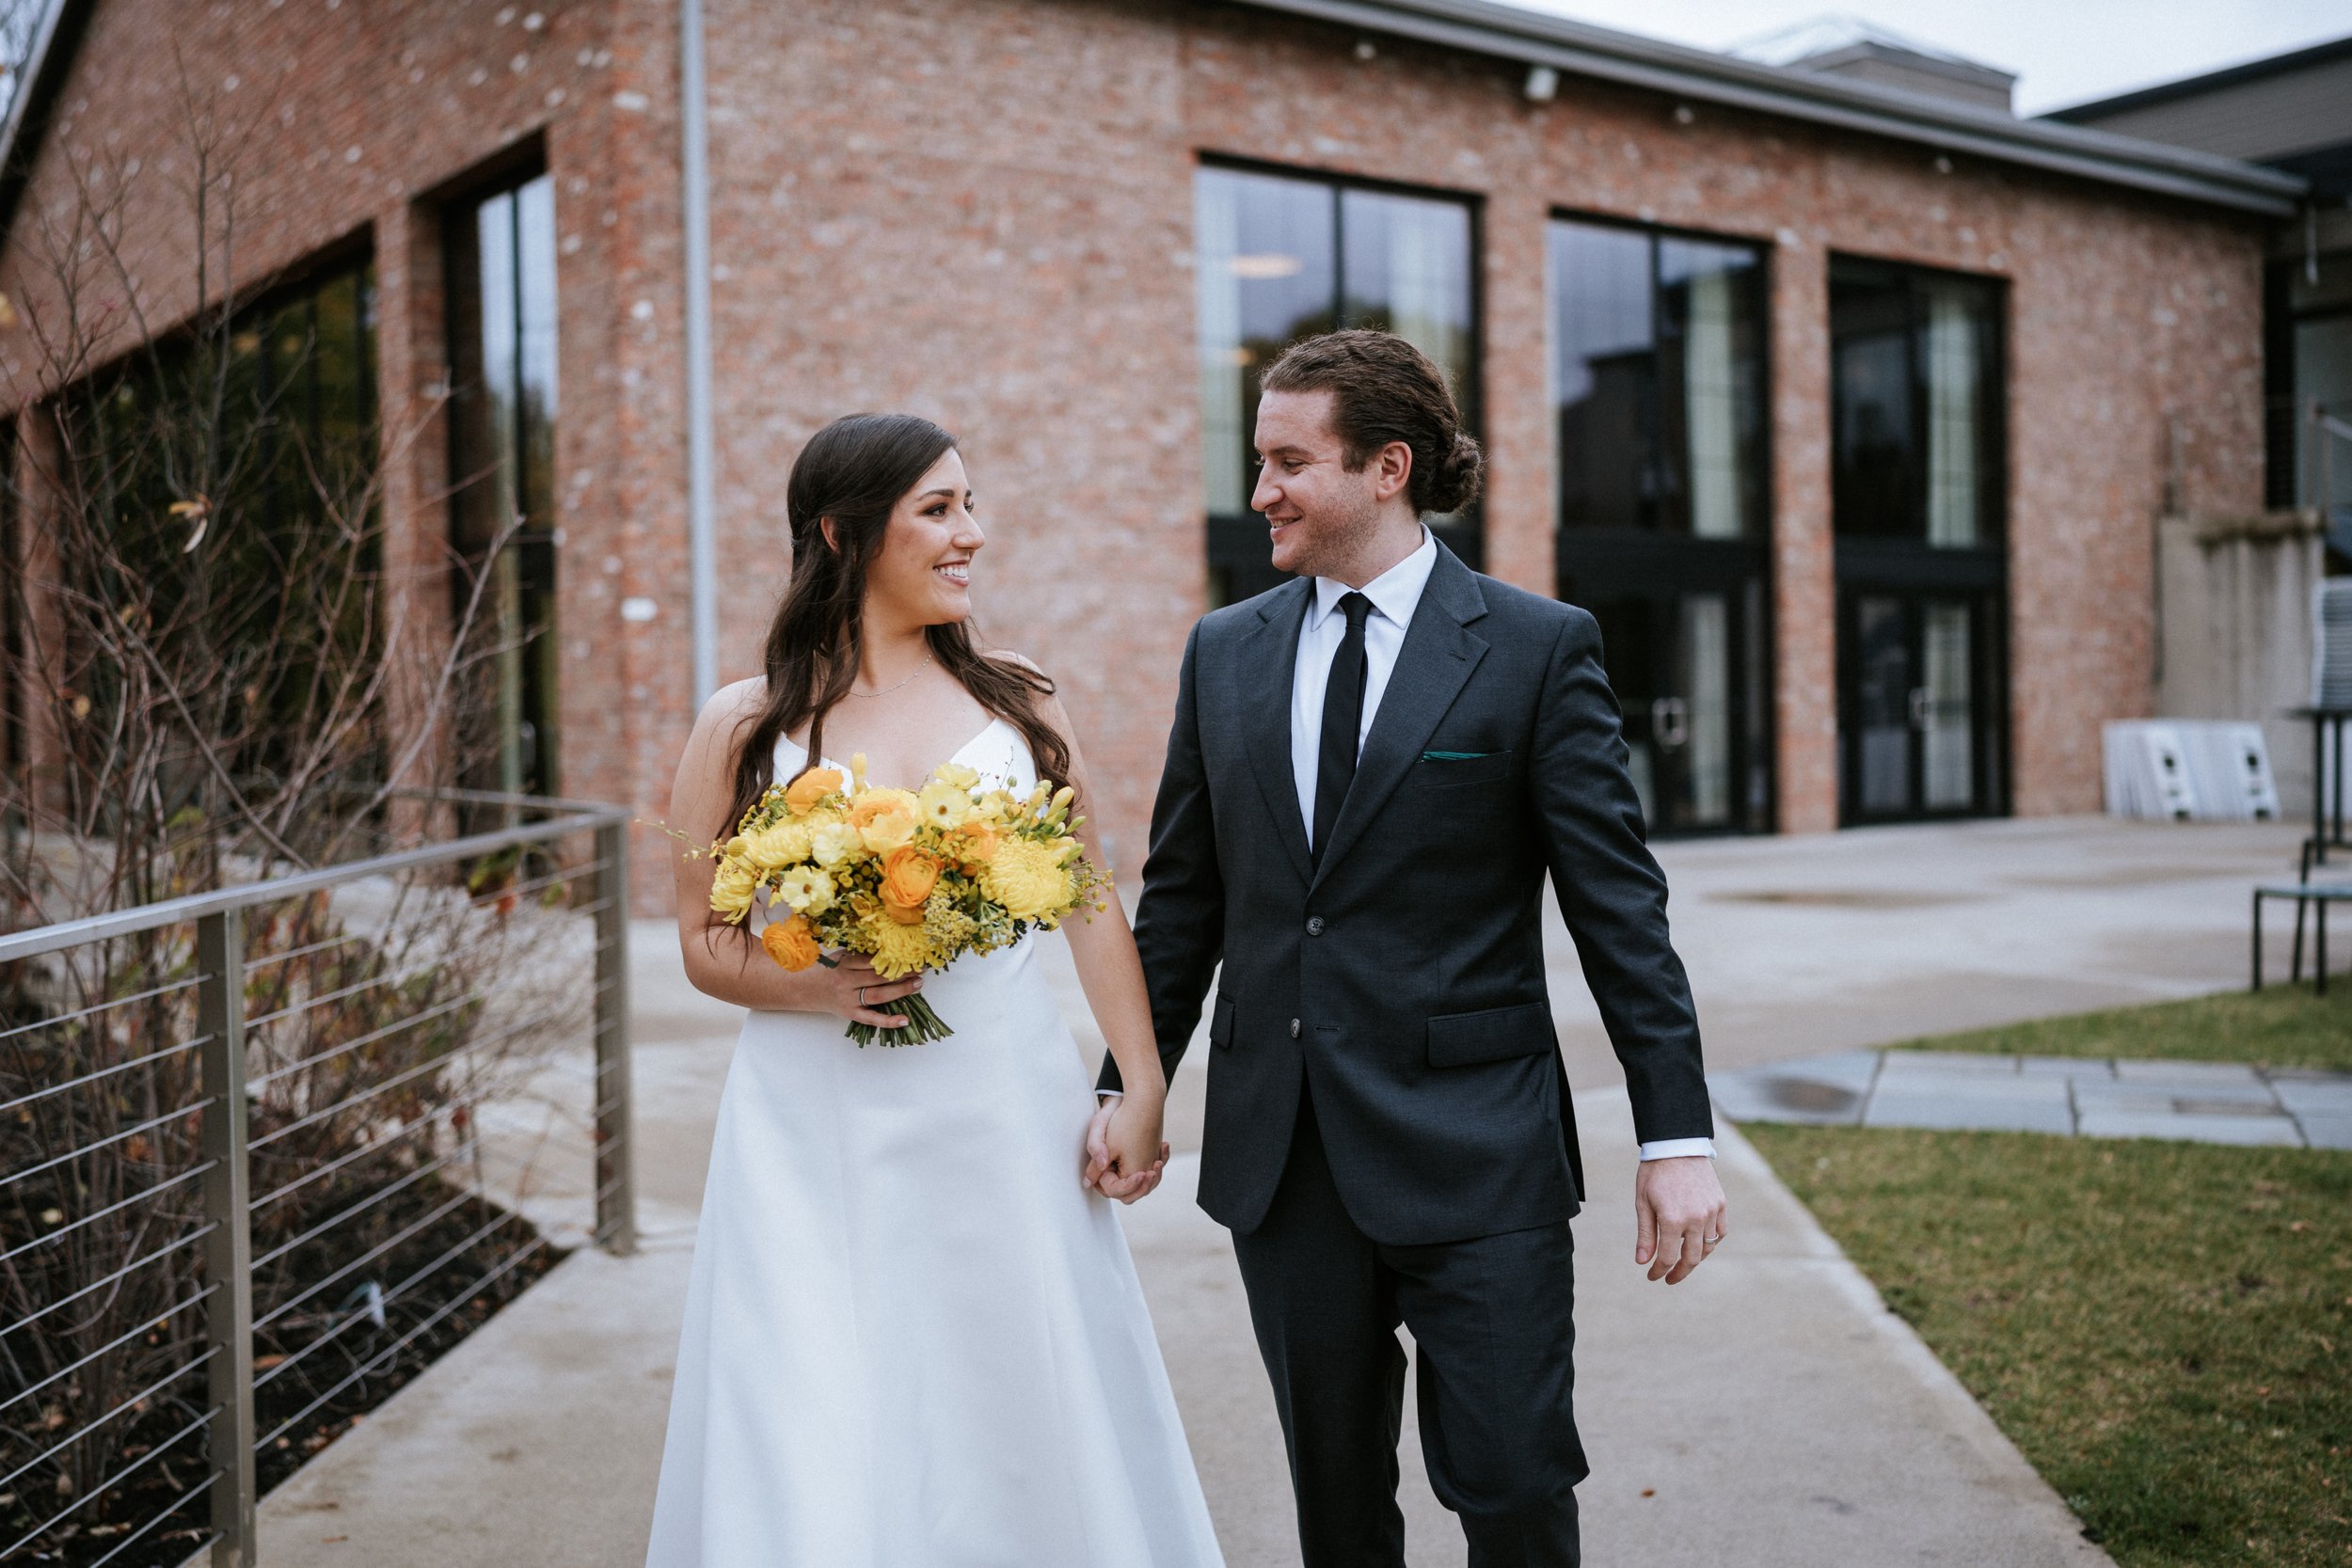 Bride and groom portraits for a wedding in the Hudson Valley